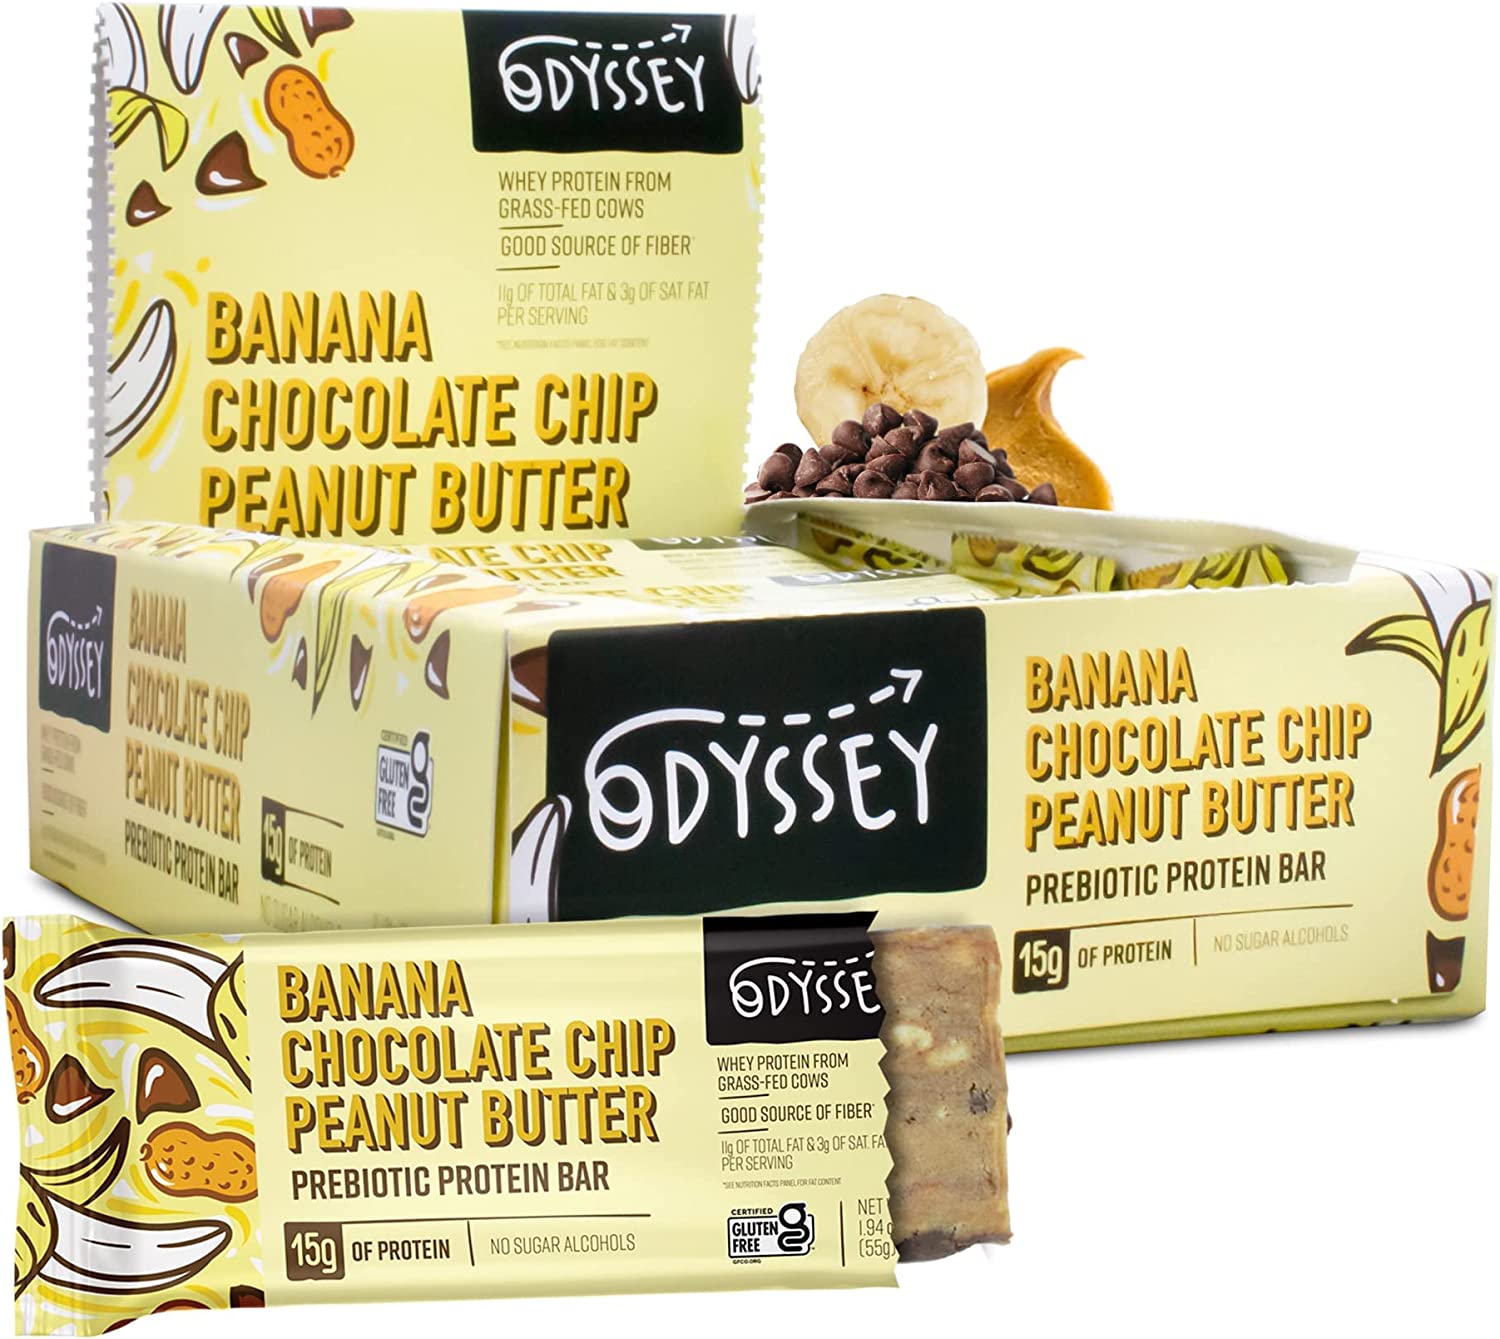 Odyssey Snacks, Prebiotic Gluten Free Protein Bars, Banana Chocolate Chip Peanut Butter 12 Pack, 15g of Whey Protein, Organic Protein Bars, Low Sugar, Low Carb, Non-GMO, Soy Free, No Sugar Alcohols